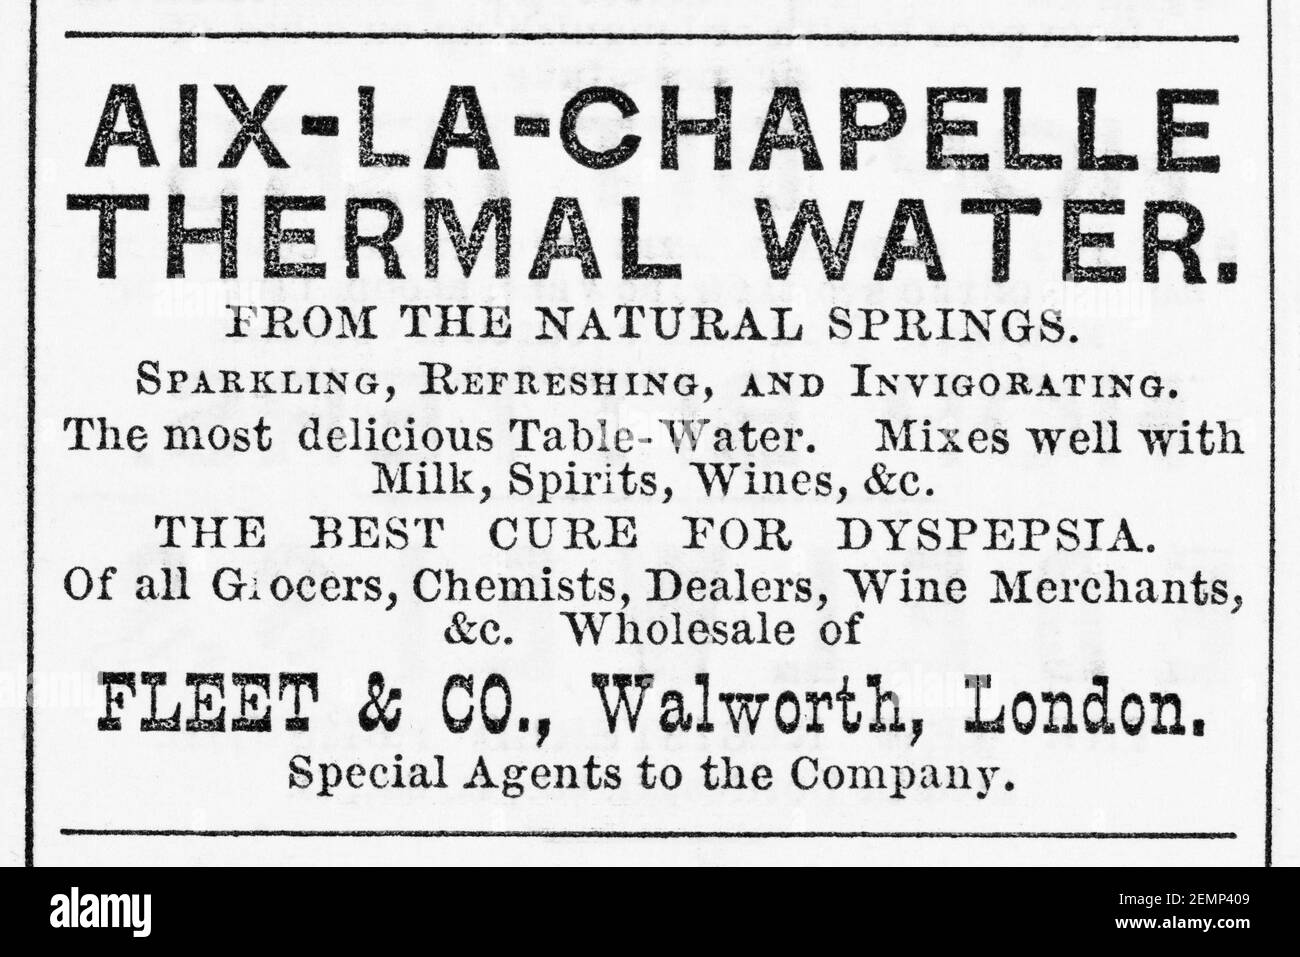 Old Victorian magazine newsprint tonic water for dyspepsia advert from 1883 - before the dawn of advertising standards. History of medicine & adverts. Stock Photo